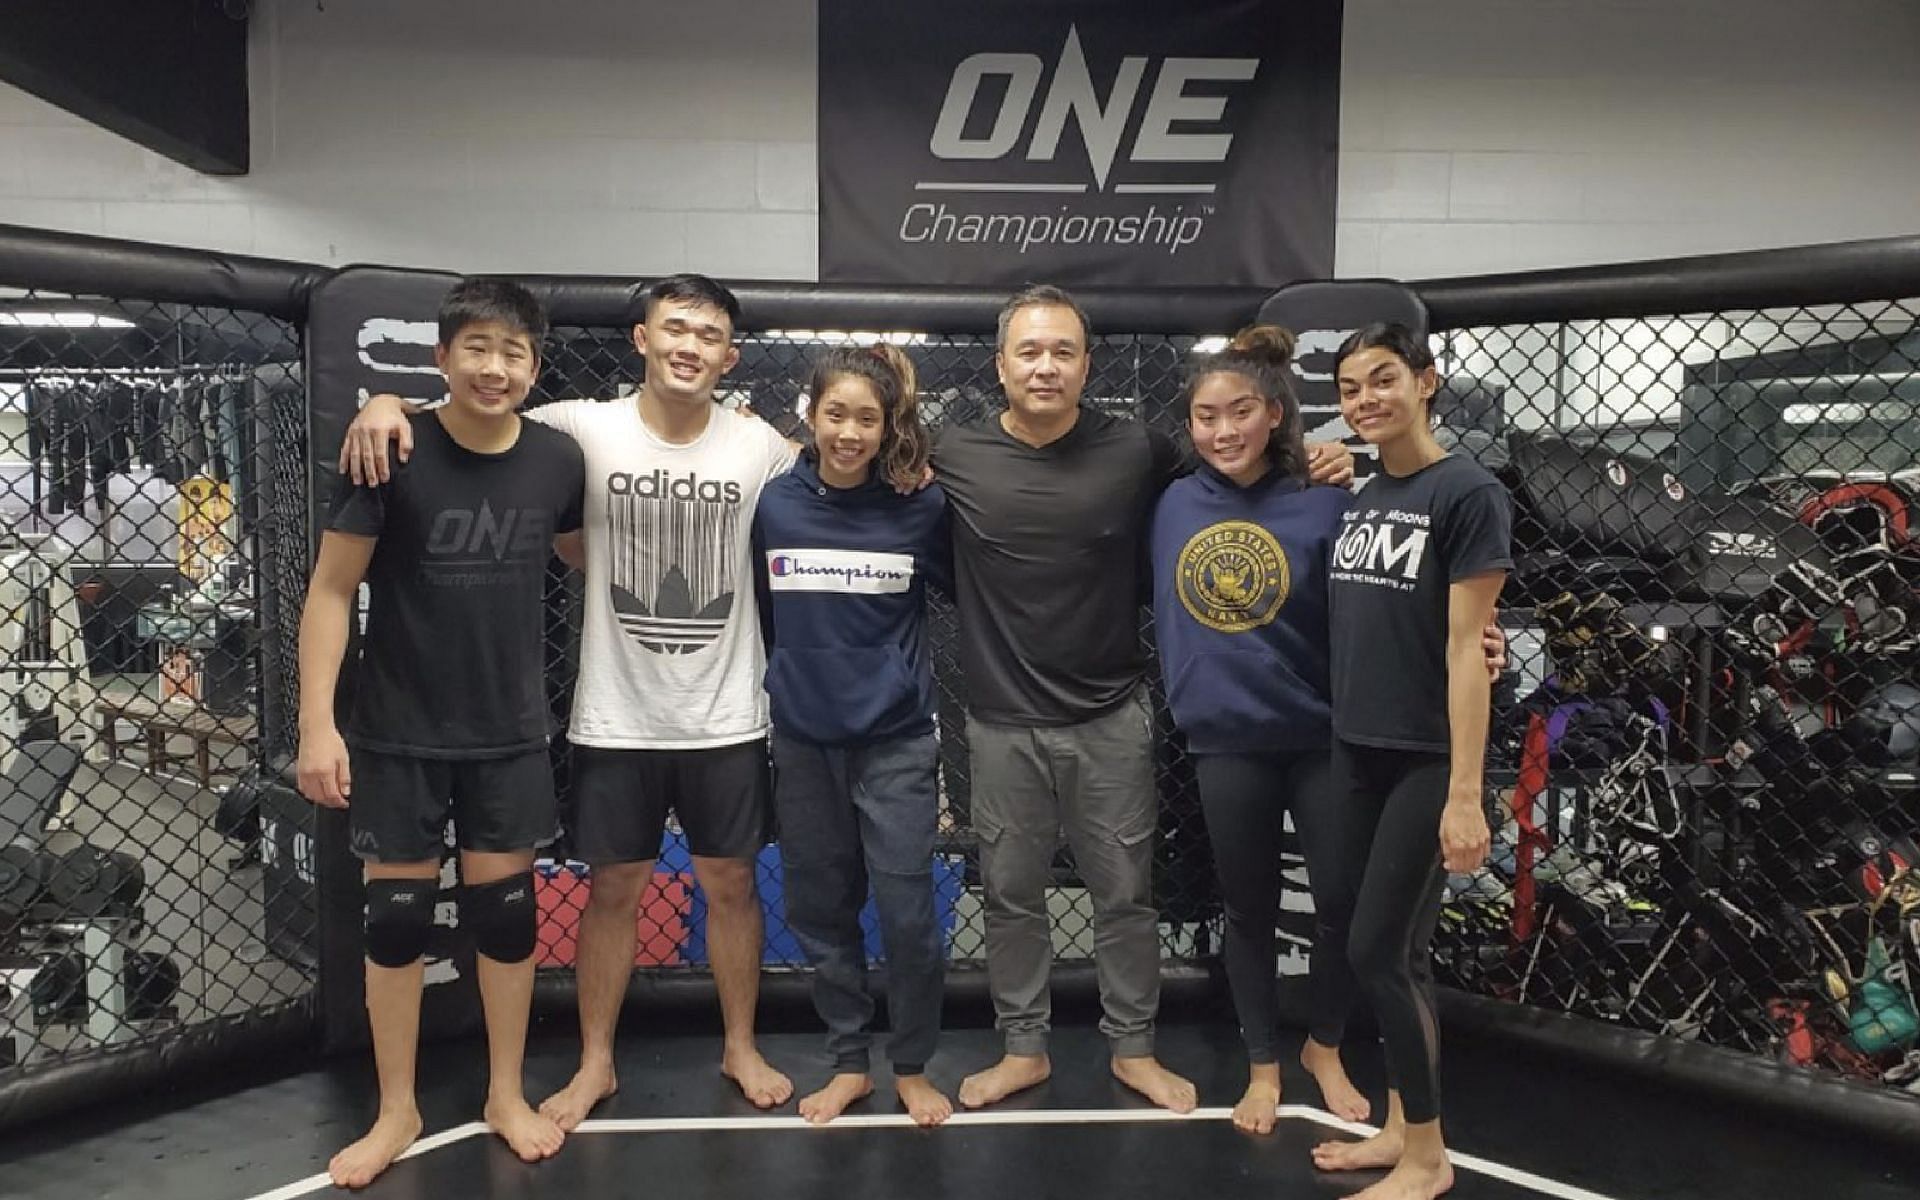 Lea Bivins (first from right) trains with the Lee family. [Photo Lea Bivins Instagram]